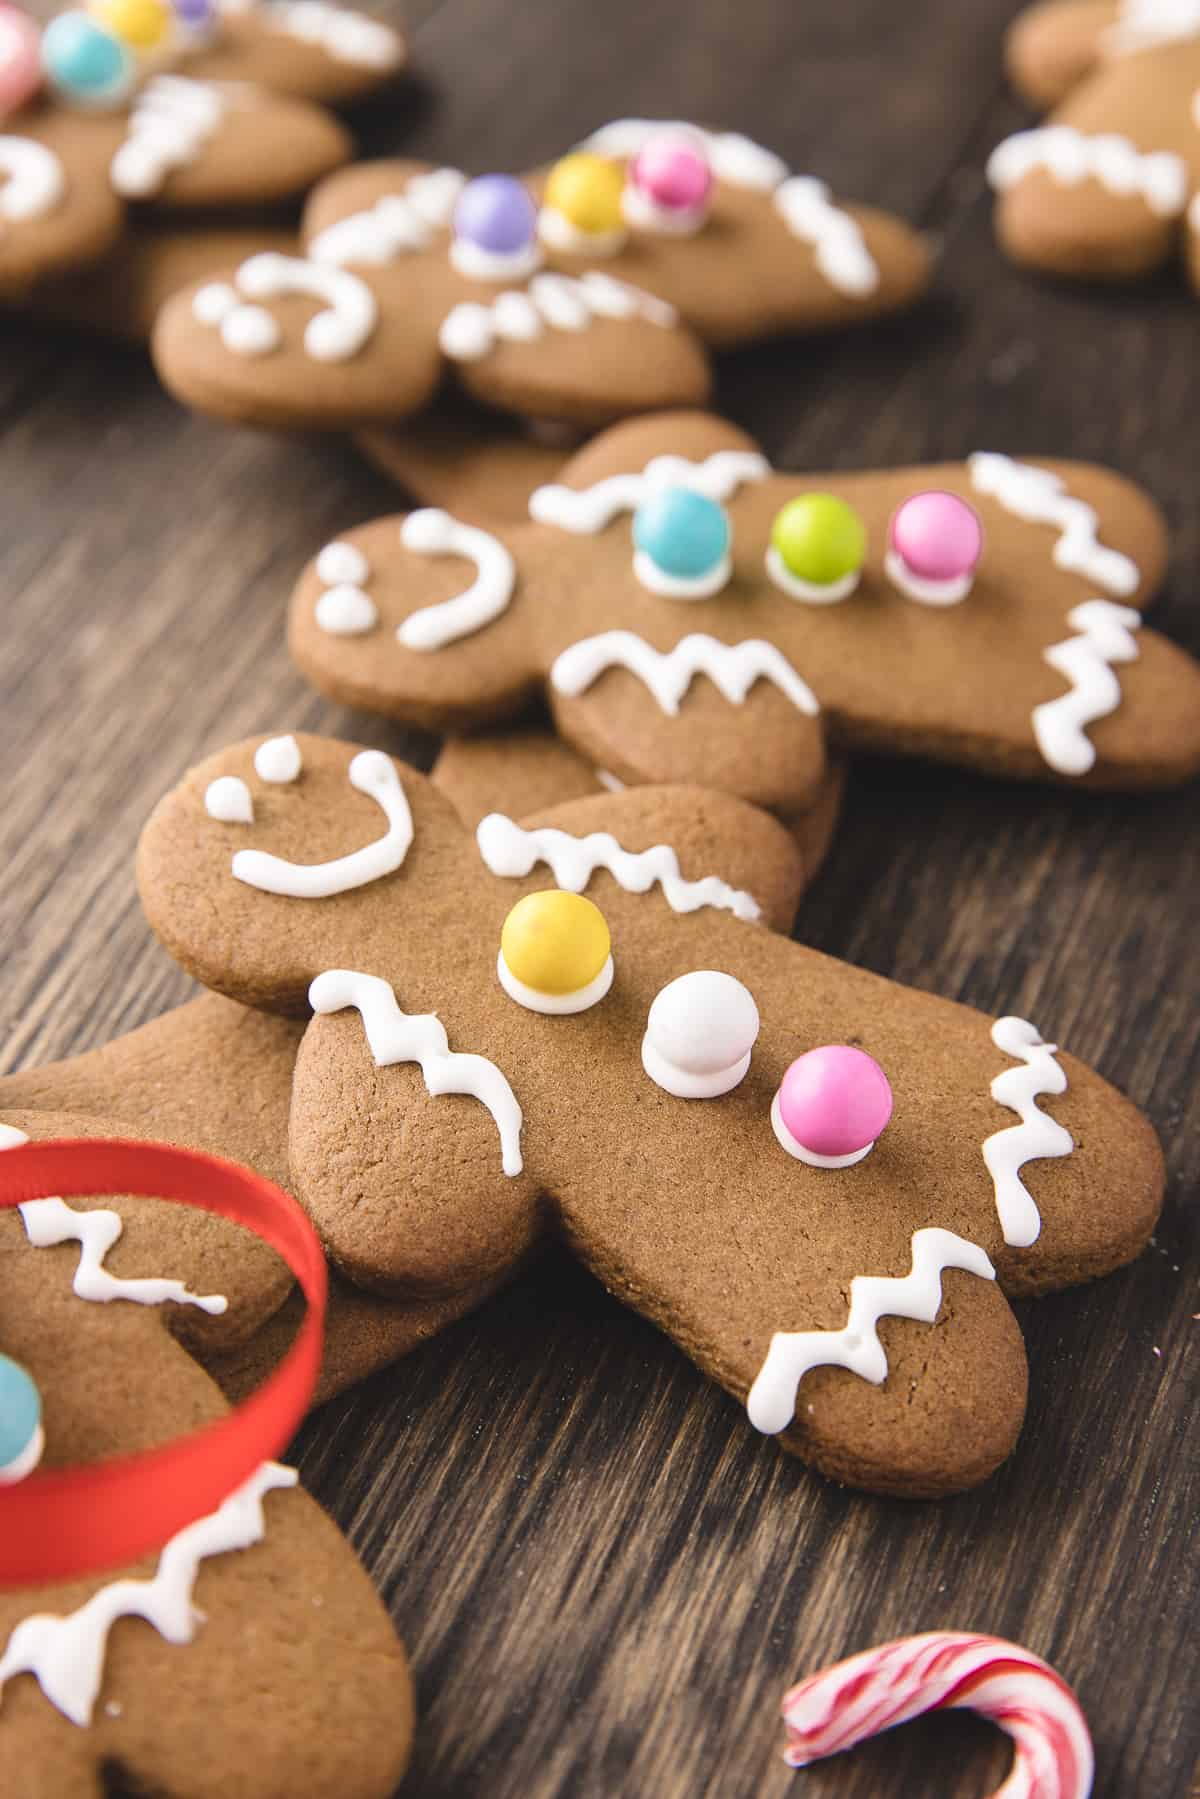 Gingerbread men glued to edible wreath on wood background. 